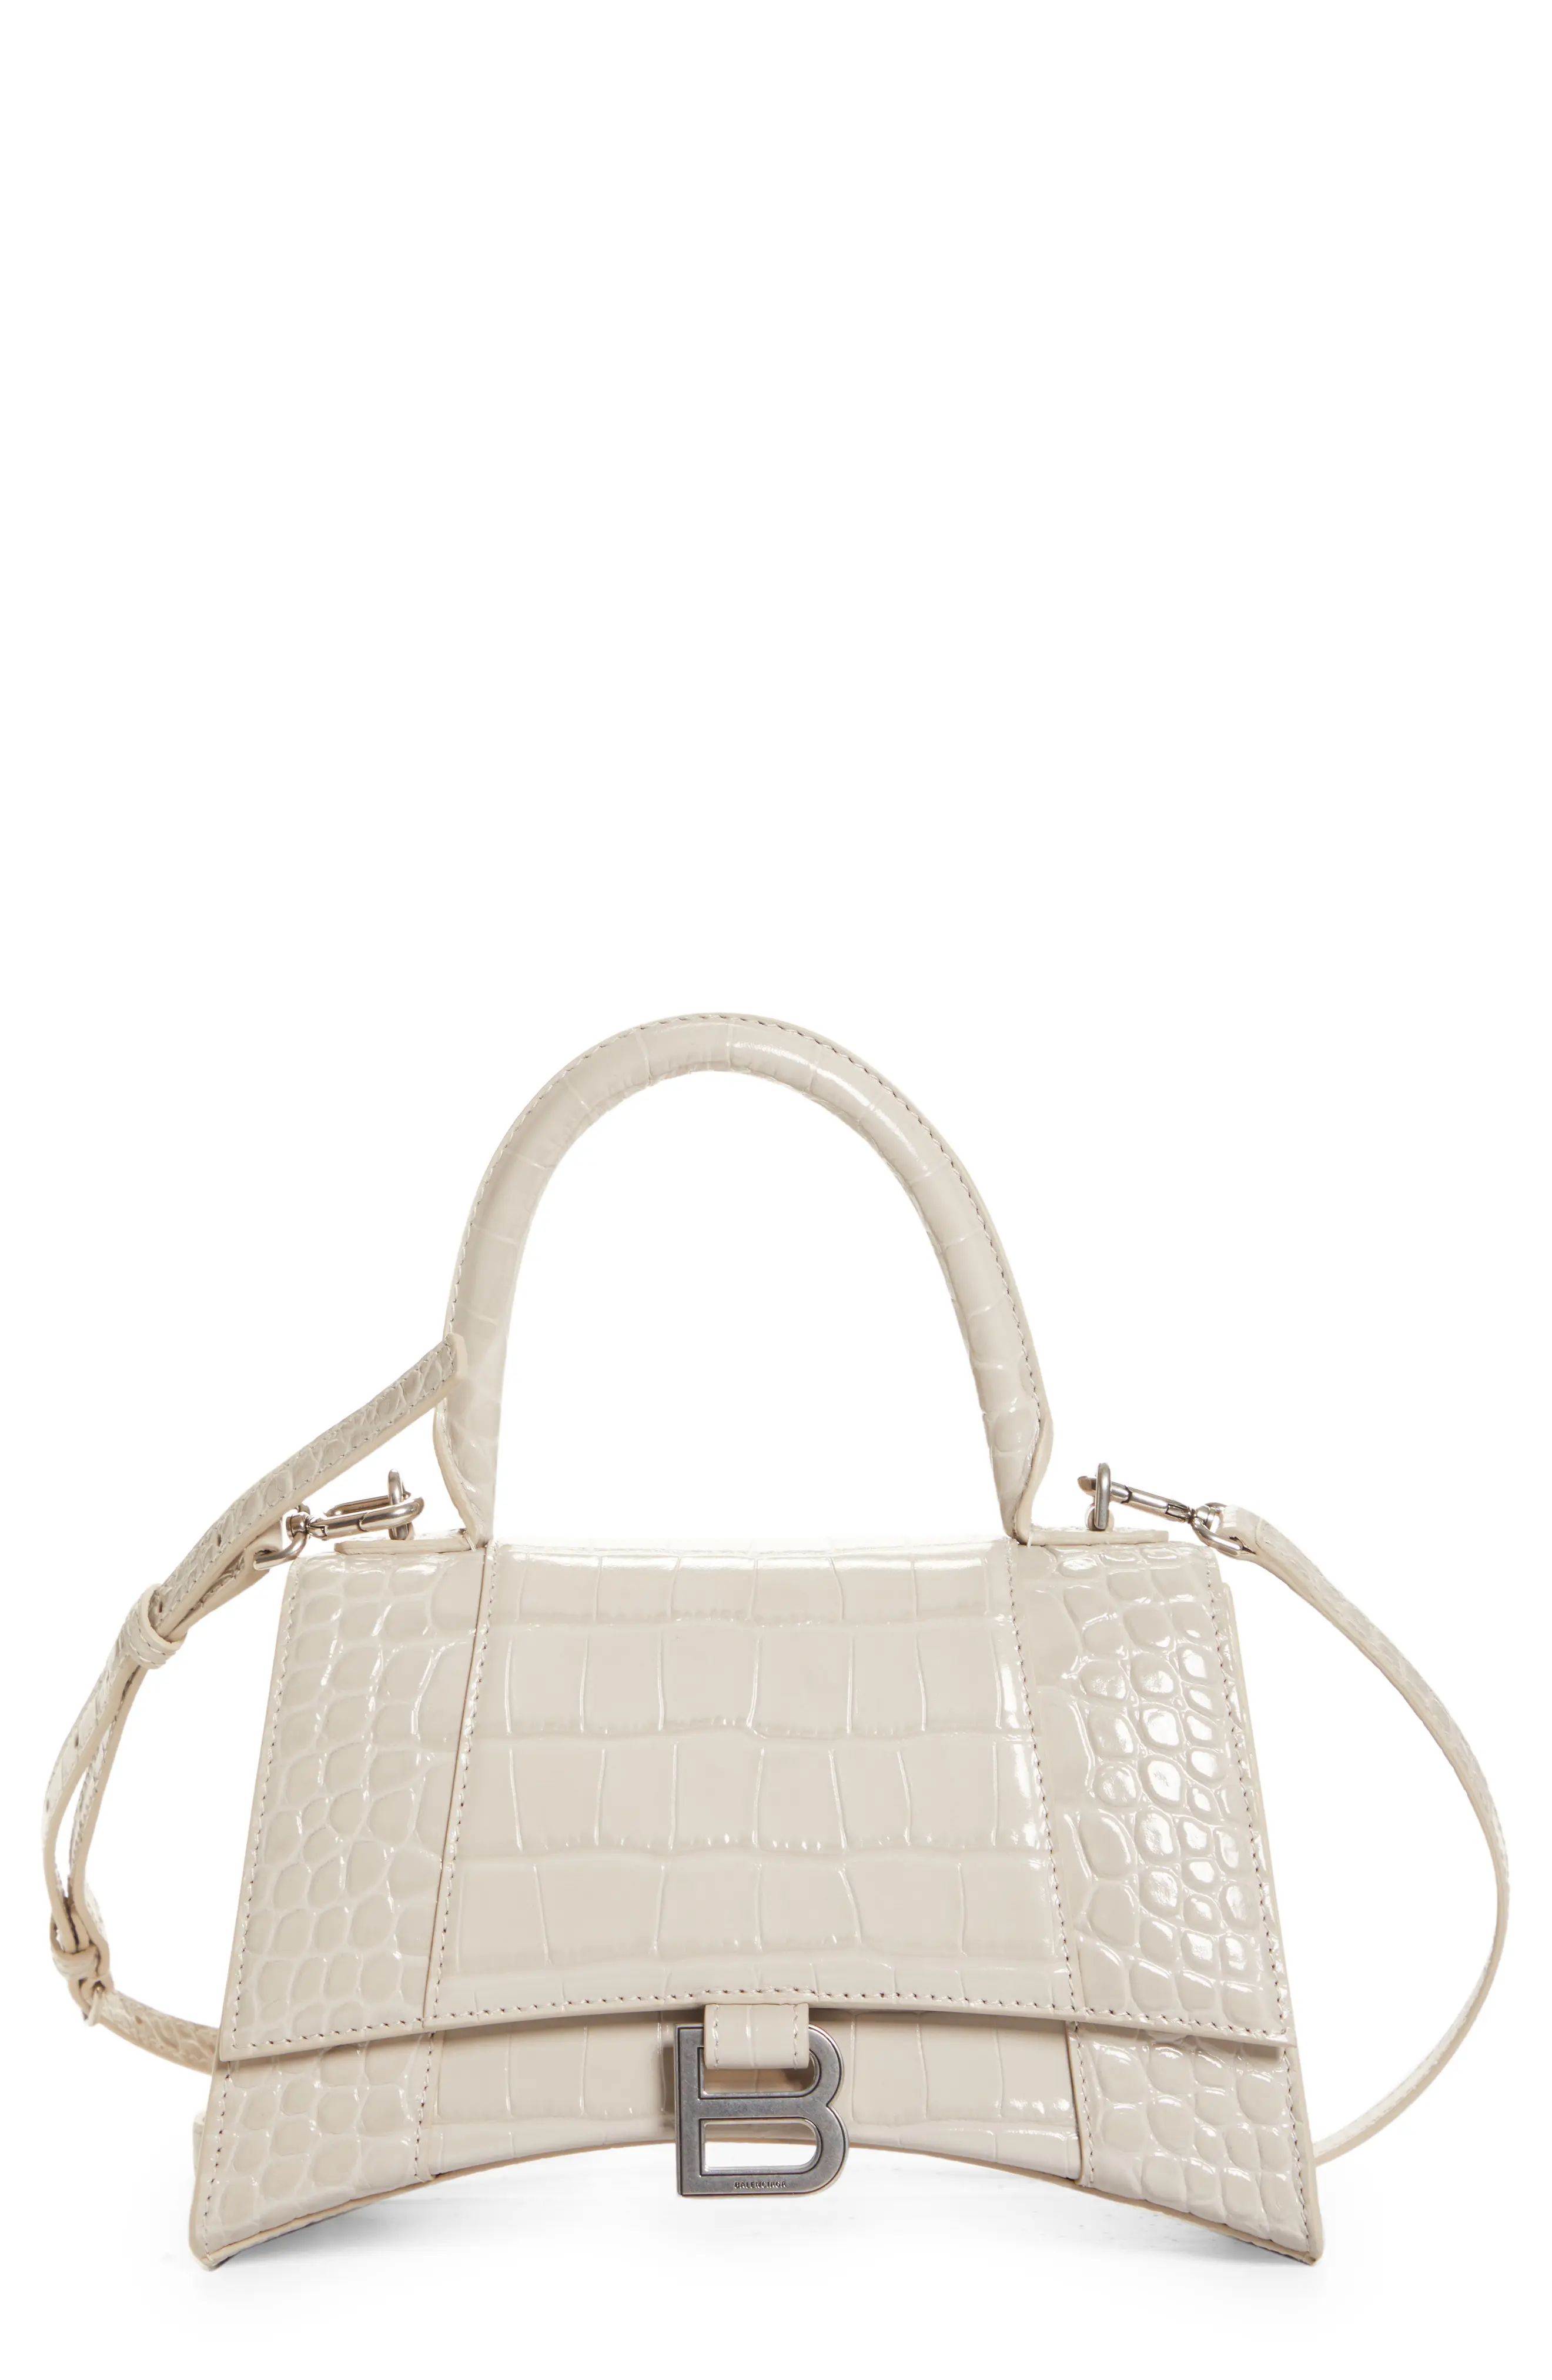 Balenciaga Small Hourglass Croc Embossed Leather Top Handle Bag in Cold Beige at Nordstrom | Nordstrom